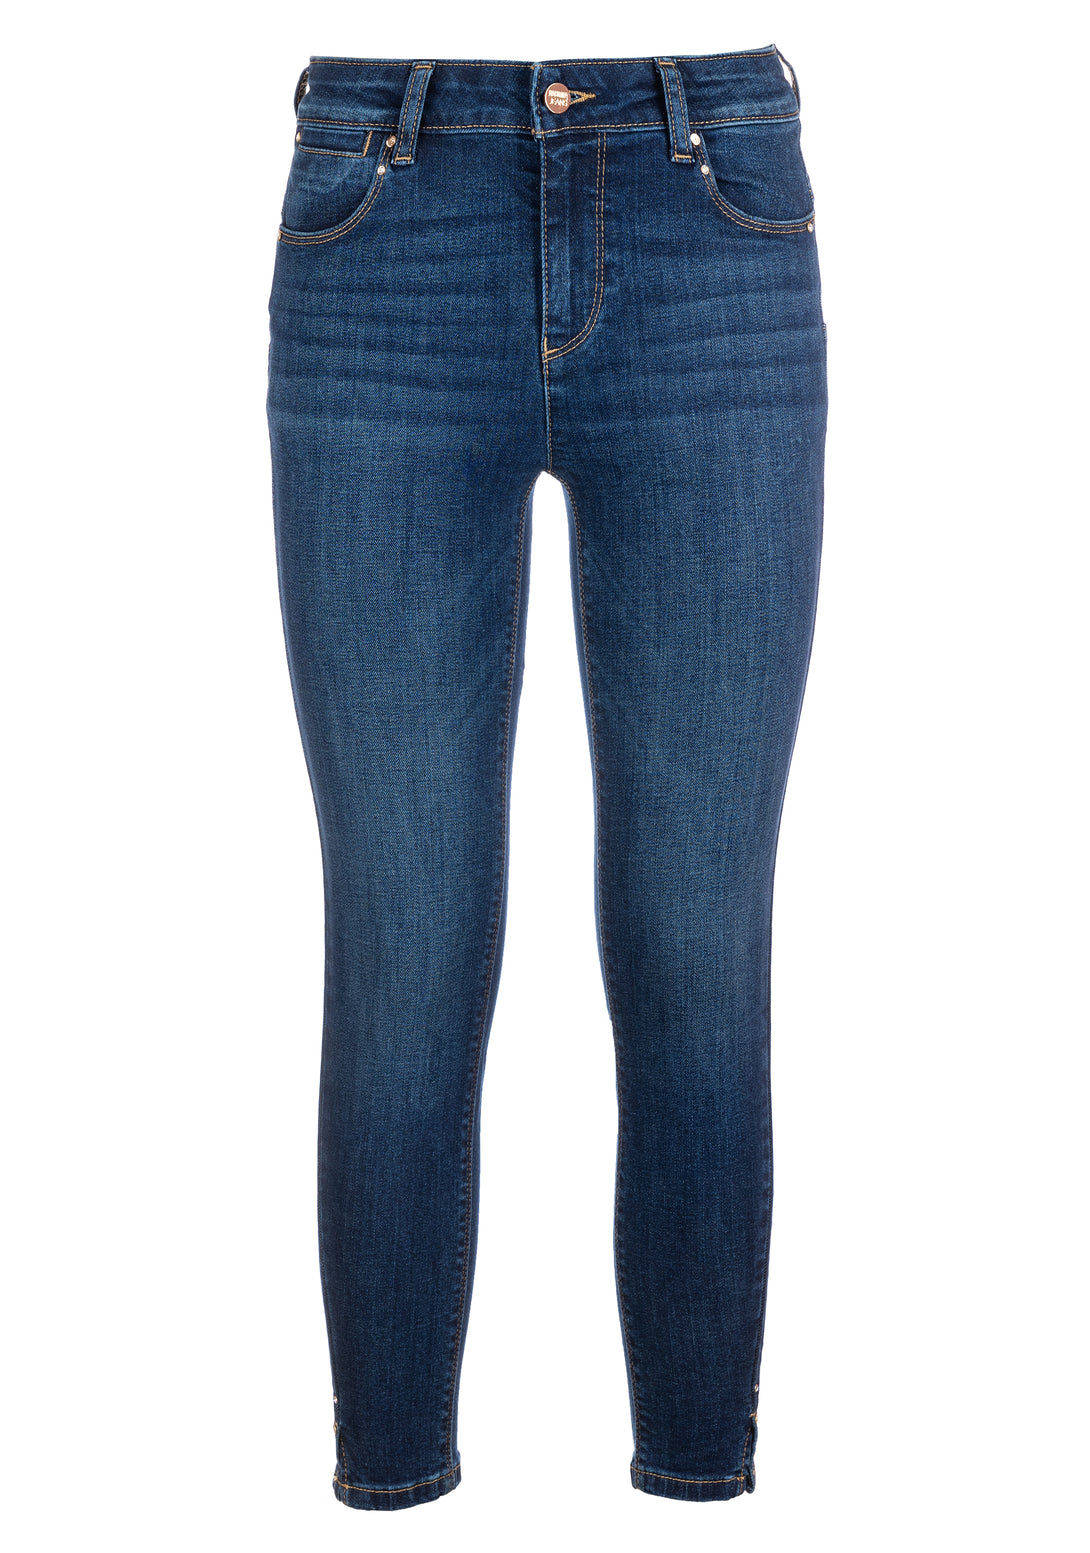 Jeans slim fit cropped with push up effect made in denim with dark wash